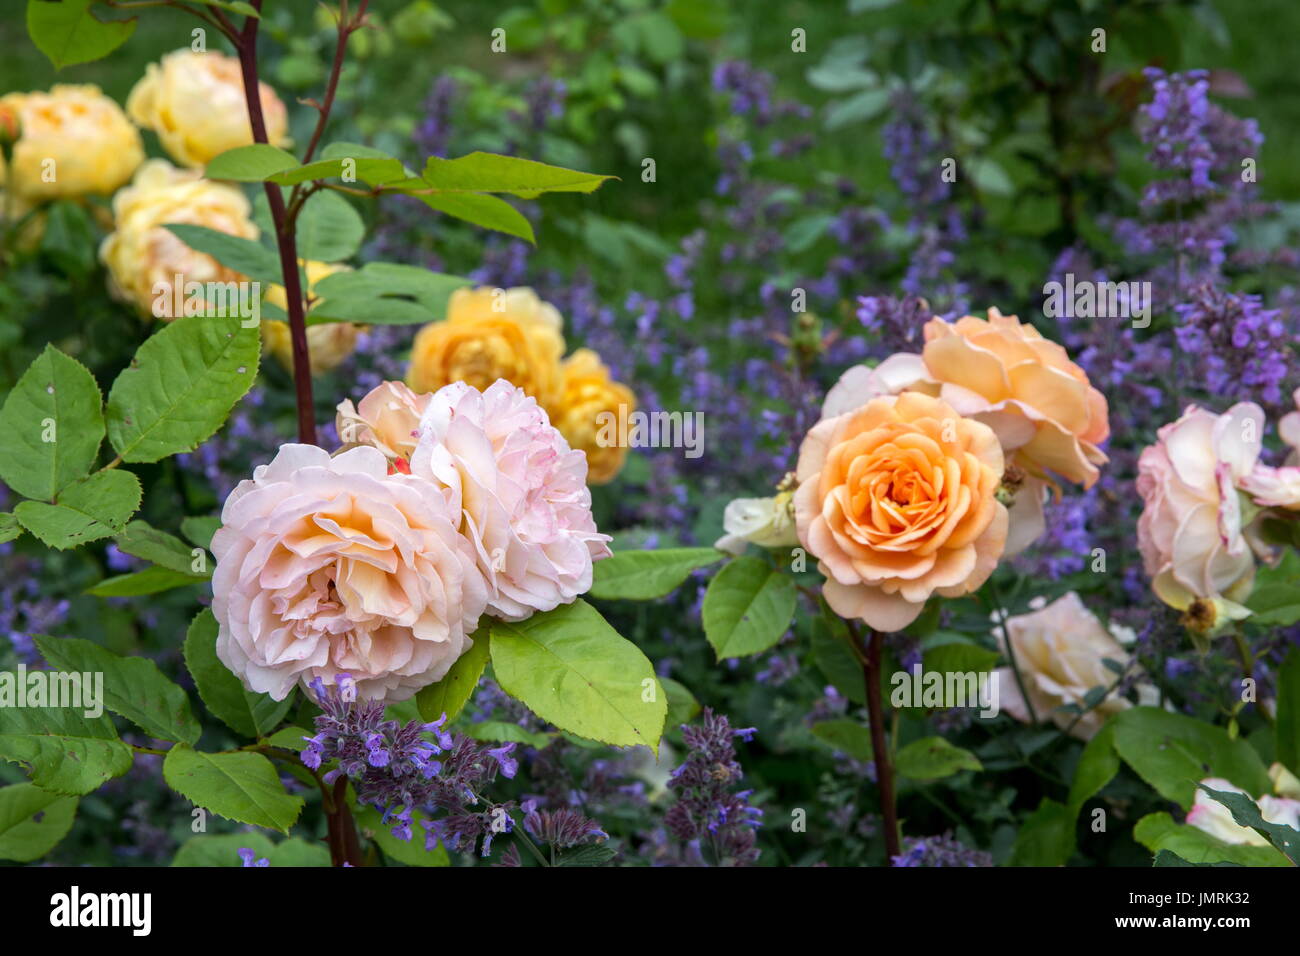 Blooming yellow orange English roses in the garden on a sunny day. 'Charles Austin' Rose Stock Photo